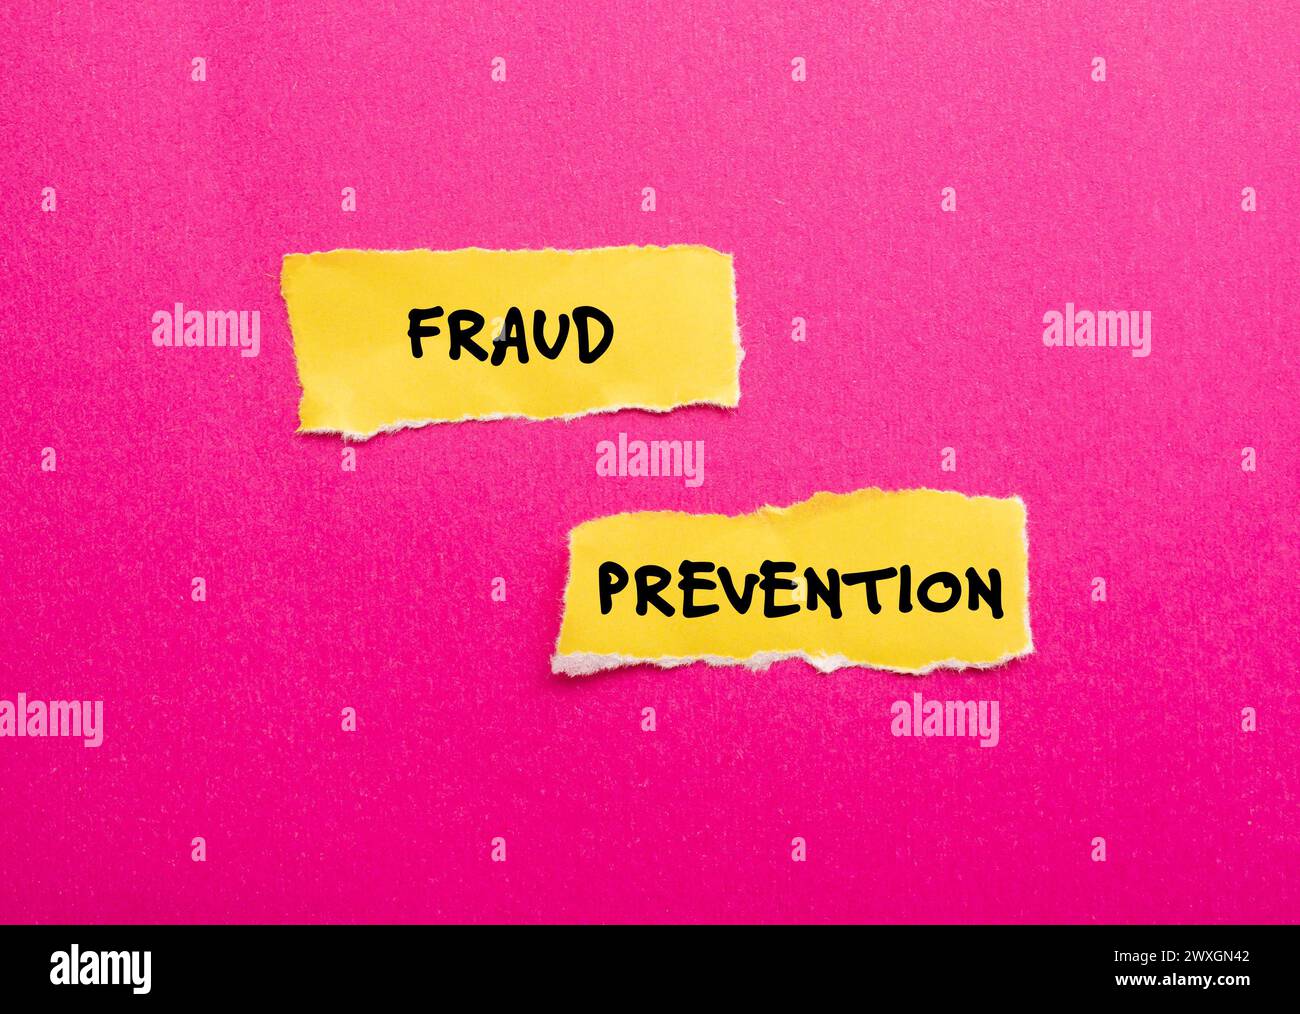 Fraud prevention words written on yellow torn paper pieces with pink background. Conceptual symbol. Copy space. Stock Photo